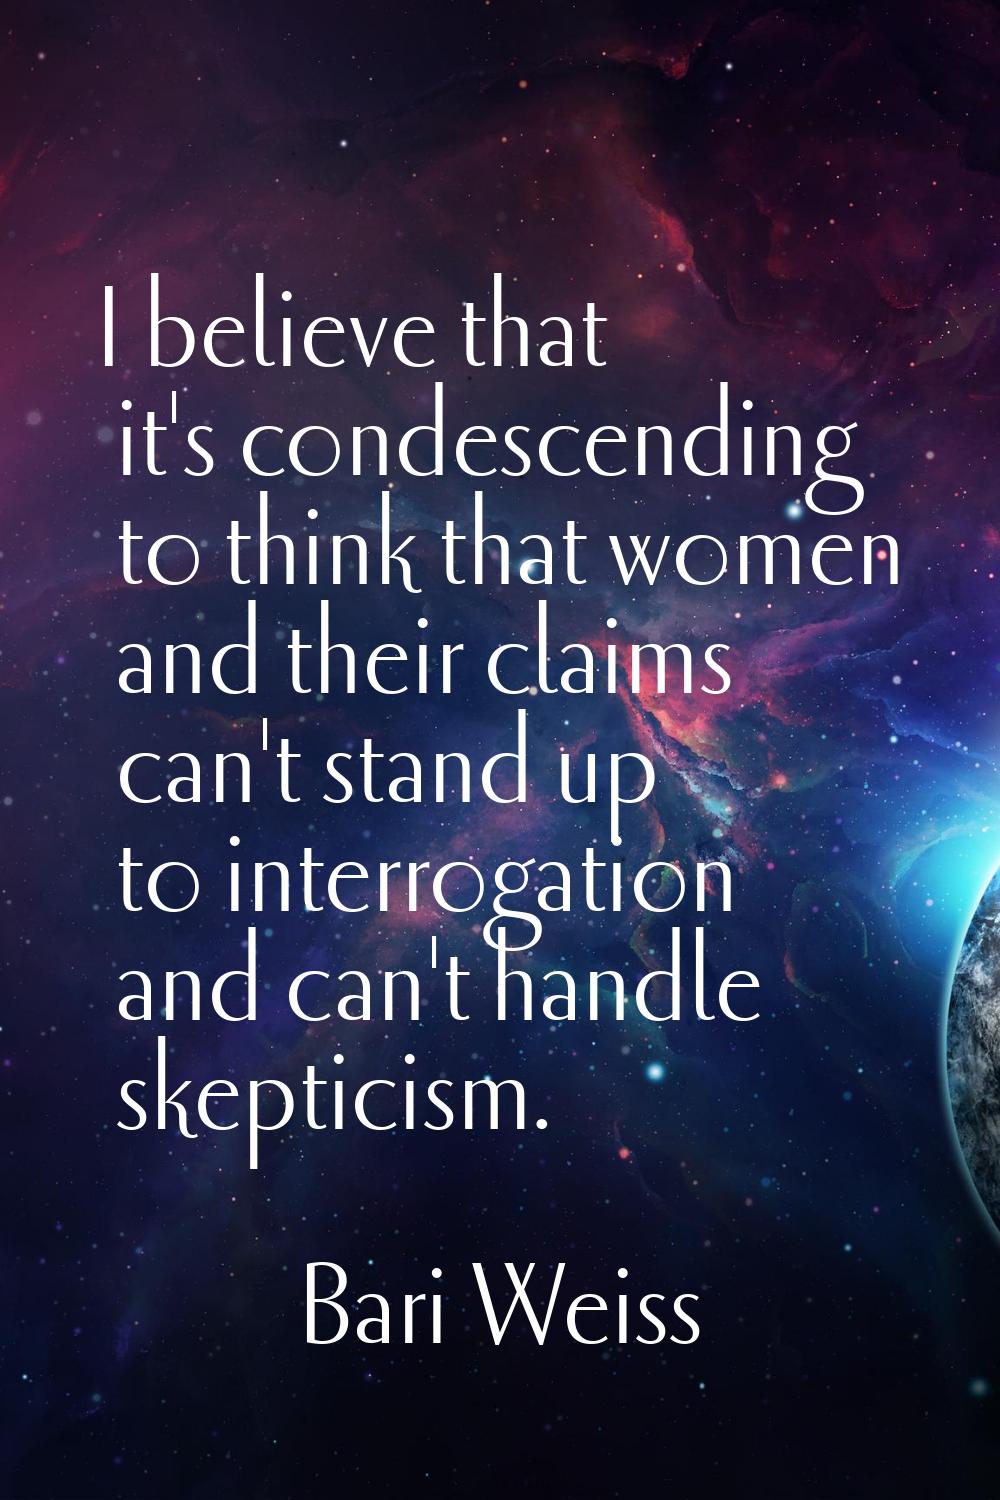 I believe that it's condescending to think that women and their claims can't stand up to interrogat